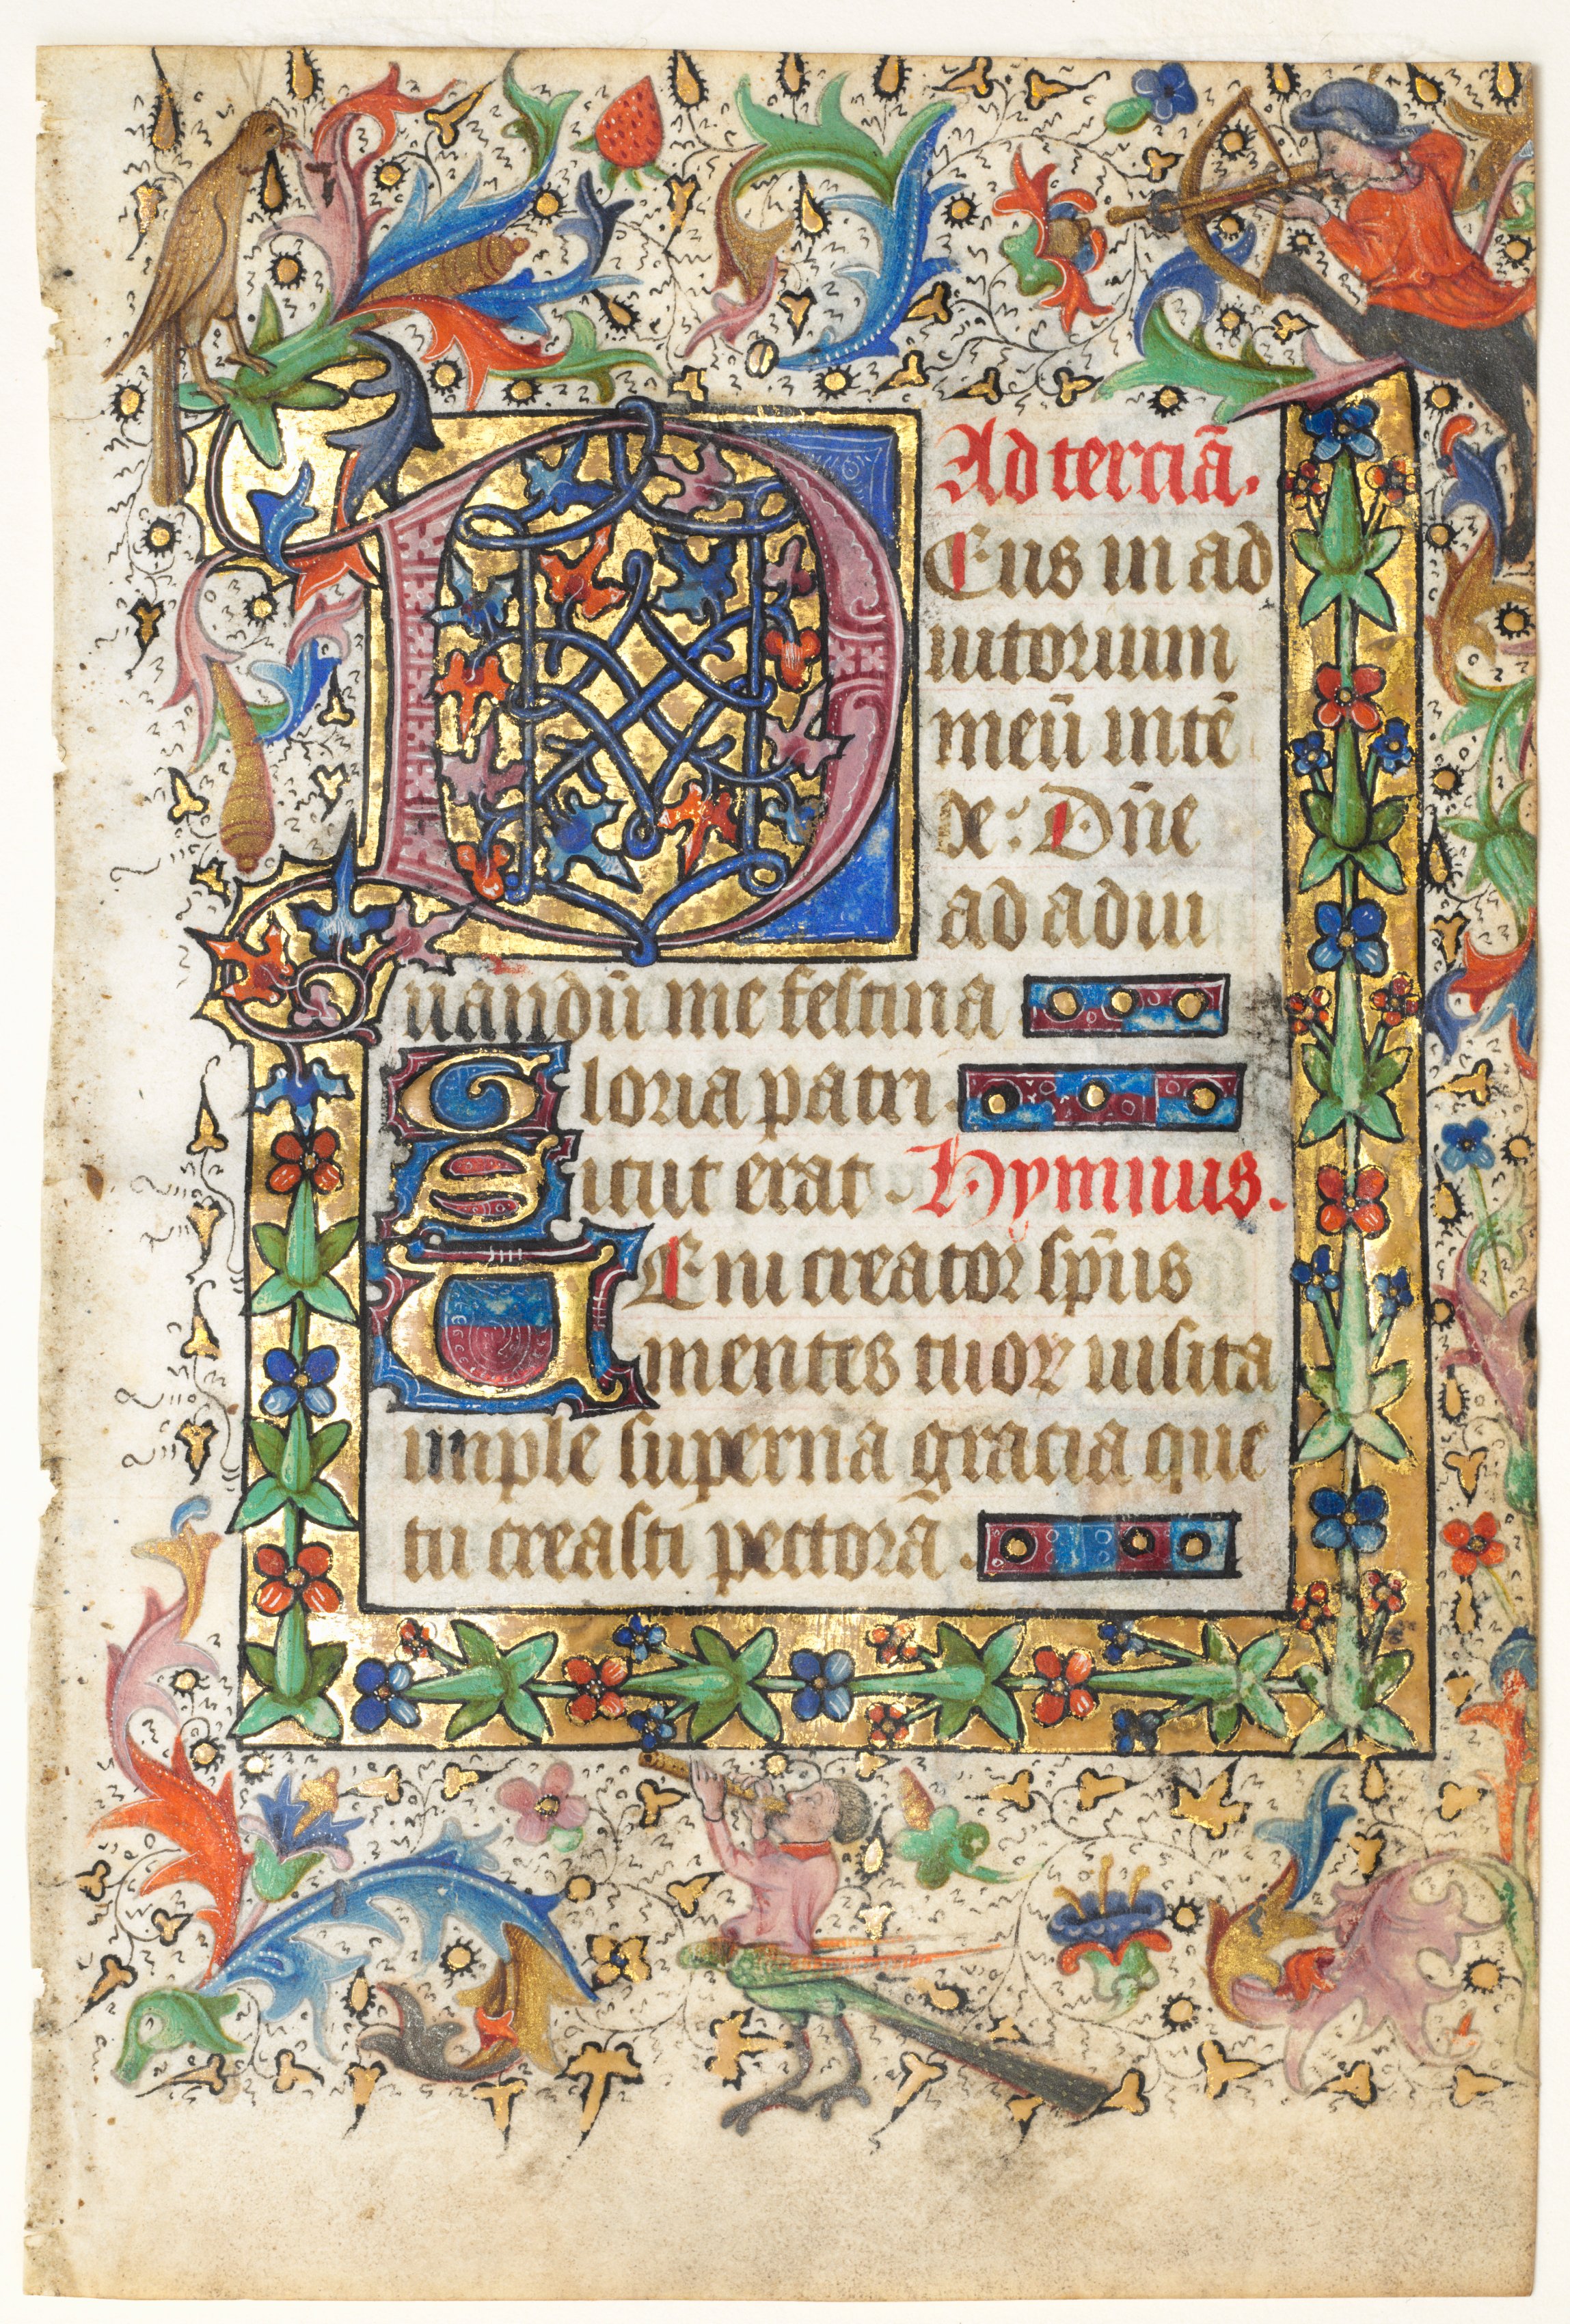 Leaf from a Book of Hours: Decorated Initial D[eus] with Foliated Border (Opening of Terce: Hours of the Holy Spirit)